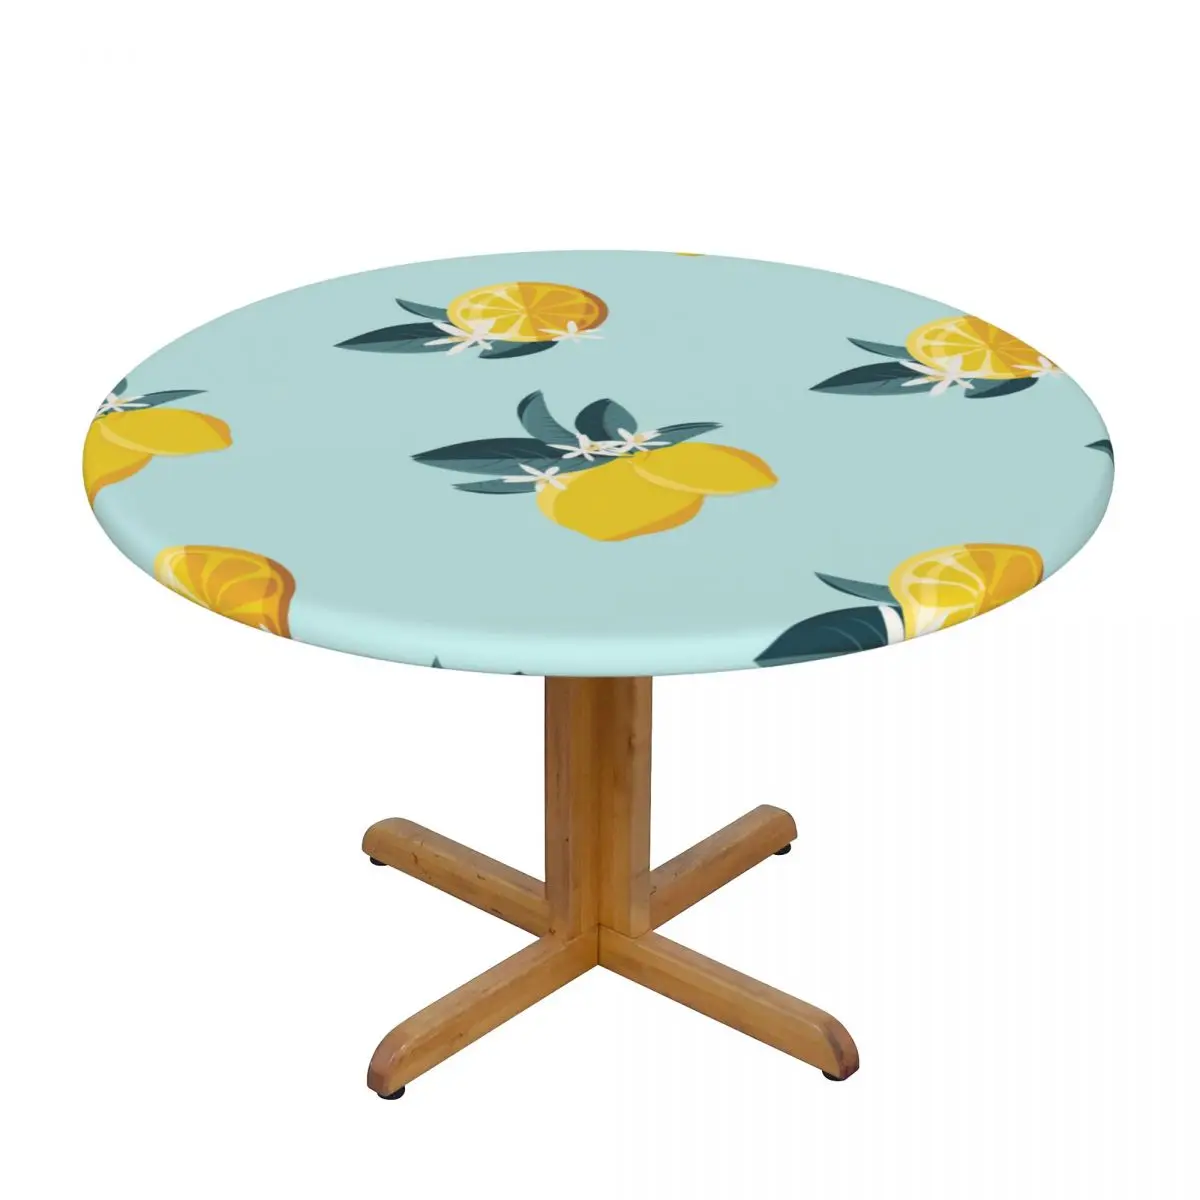 

Round Table Cover Cloth Protector Polyester Tablecloth Tropical Summer Lemon Pattern Fitted Table Cover with Elastic Edged